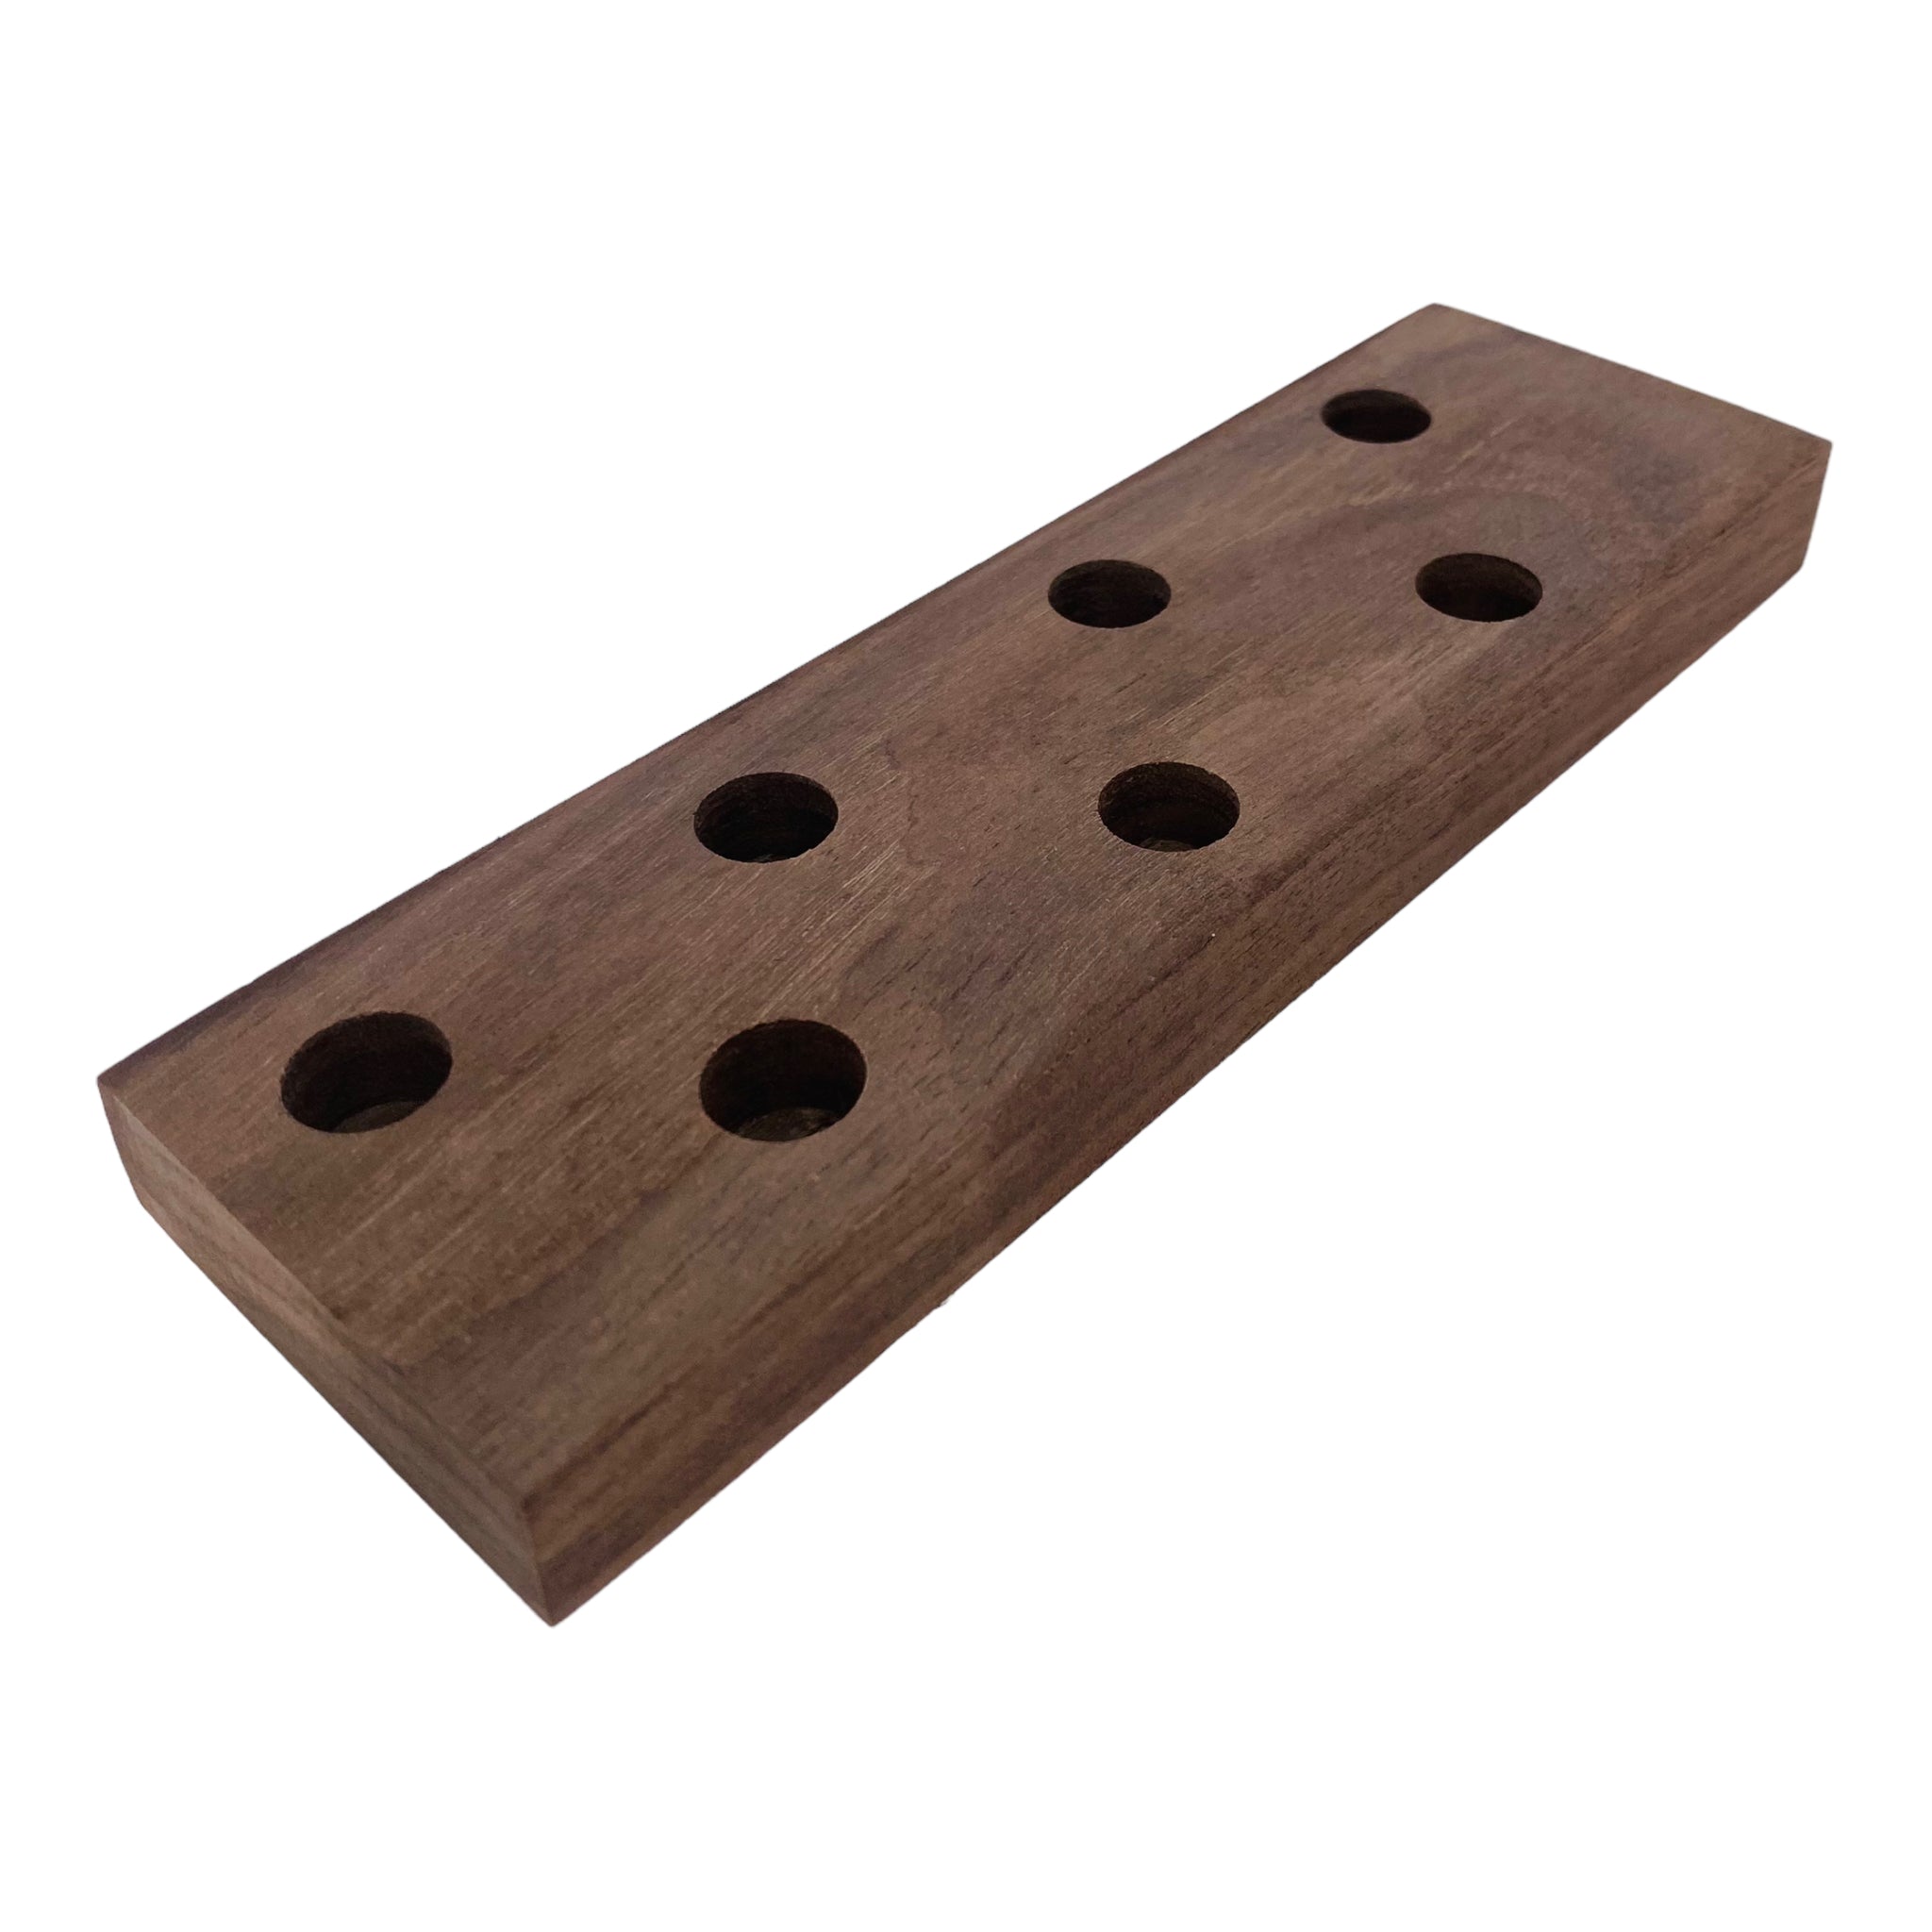 7 Hole Wood Display Stand Holder For 14mm Bong Bowl Pieces Or Quartz Bangers - Black Walnut